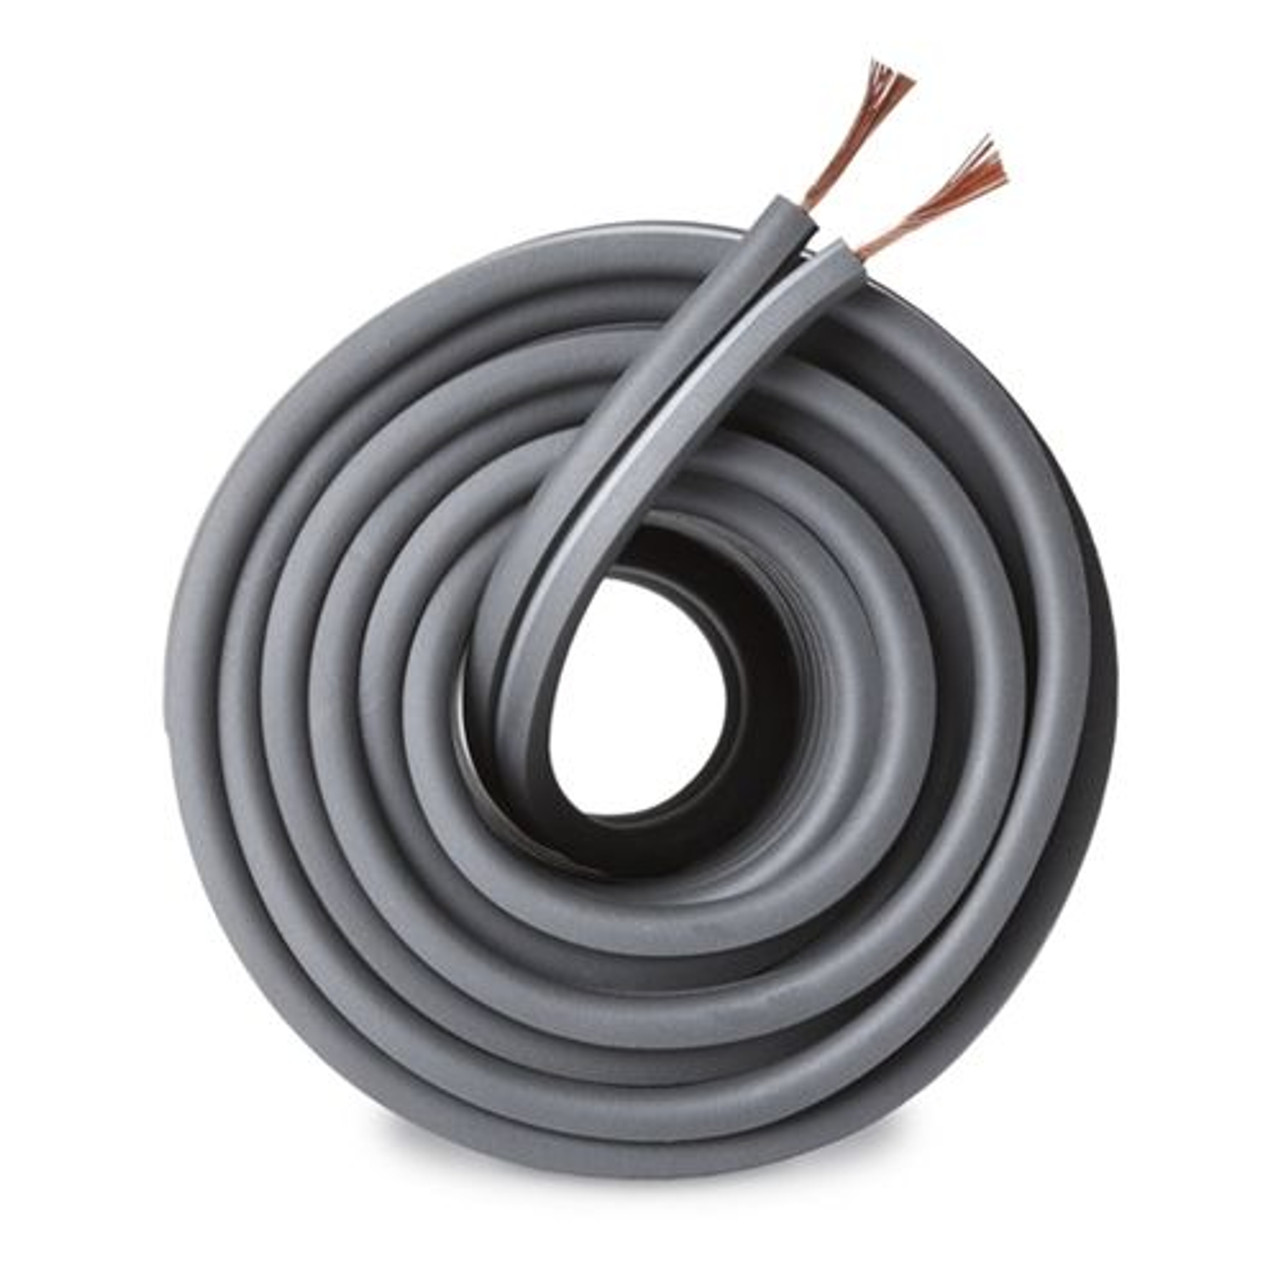 Monster 100' FT Speaker Cable 16 AWG GA 2 Conductor Standard Stranded Copper Gray S16 Oxygen Free Flexible